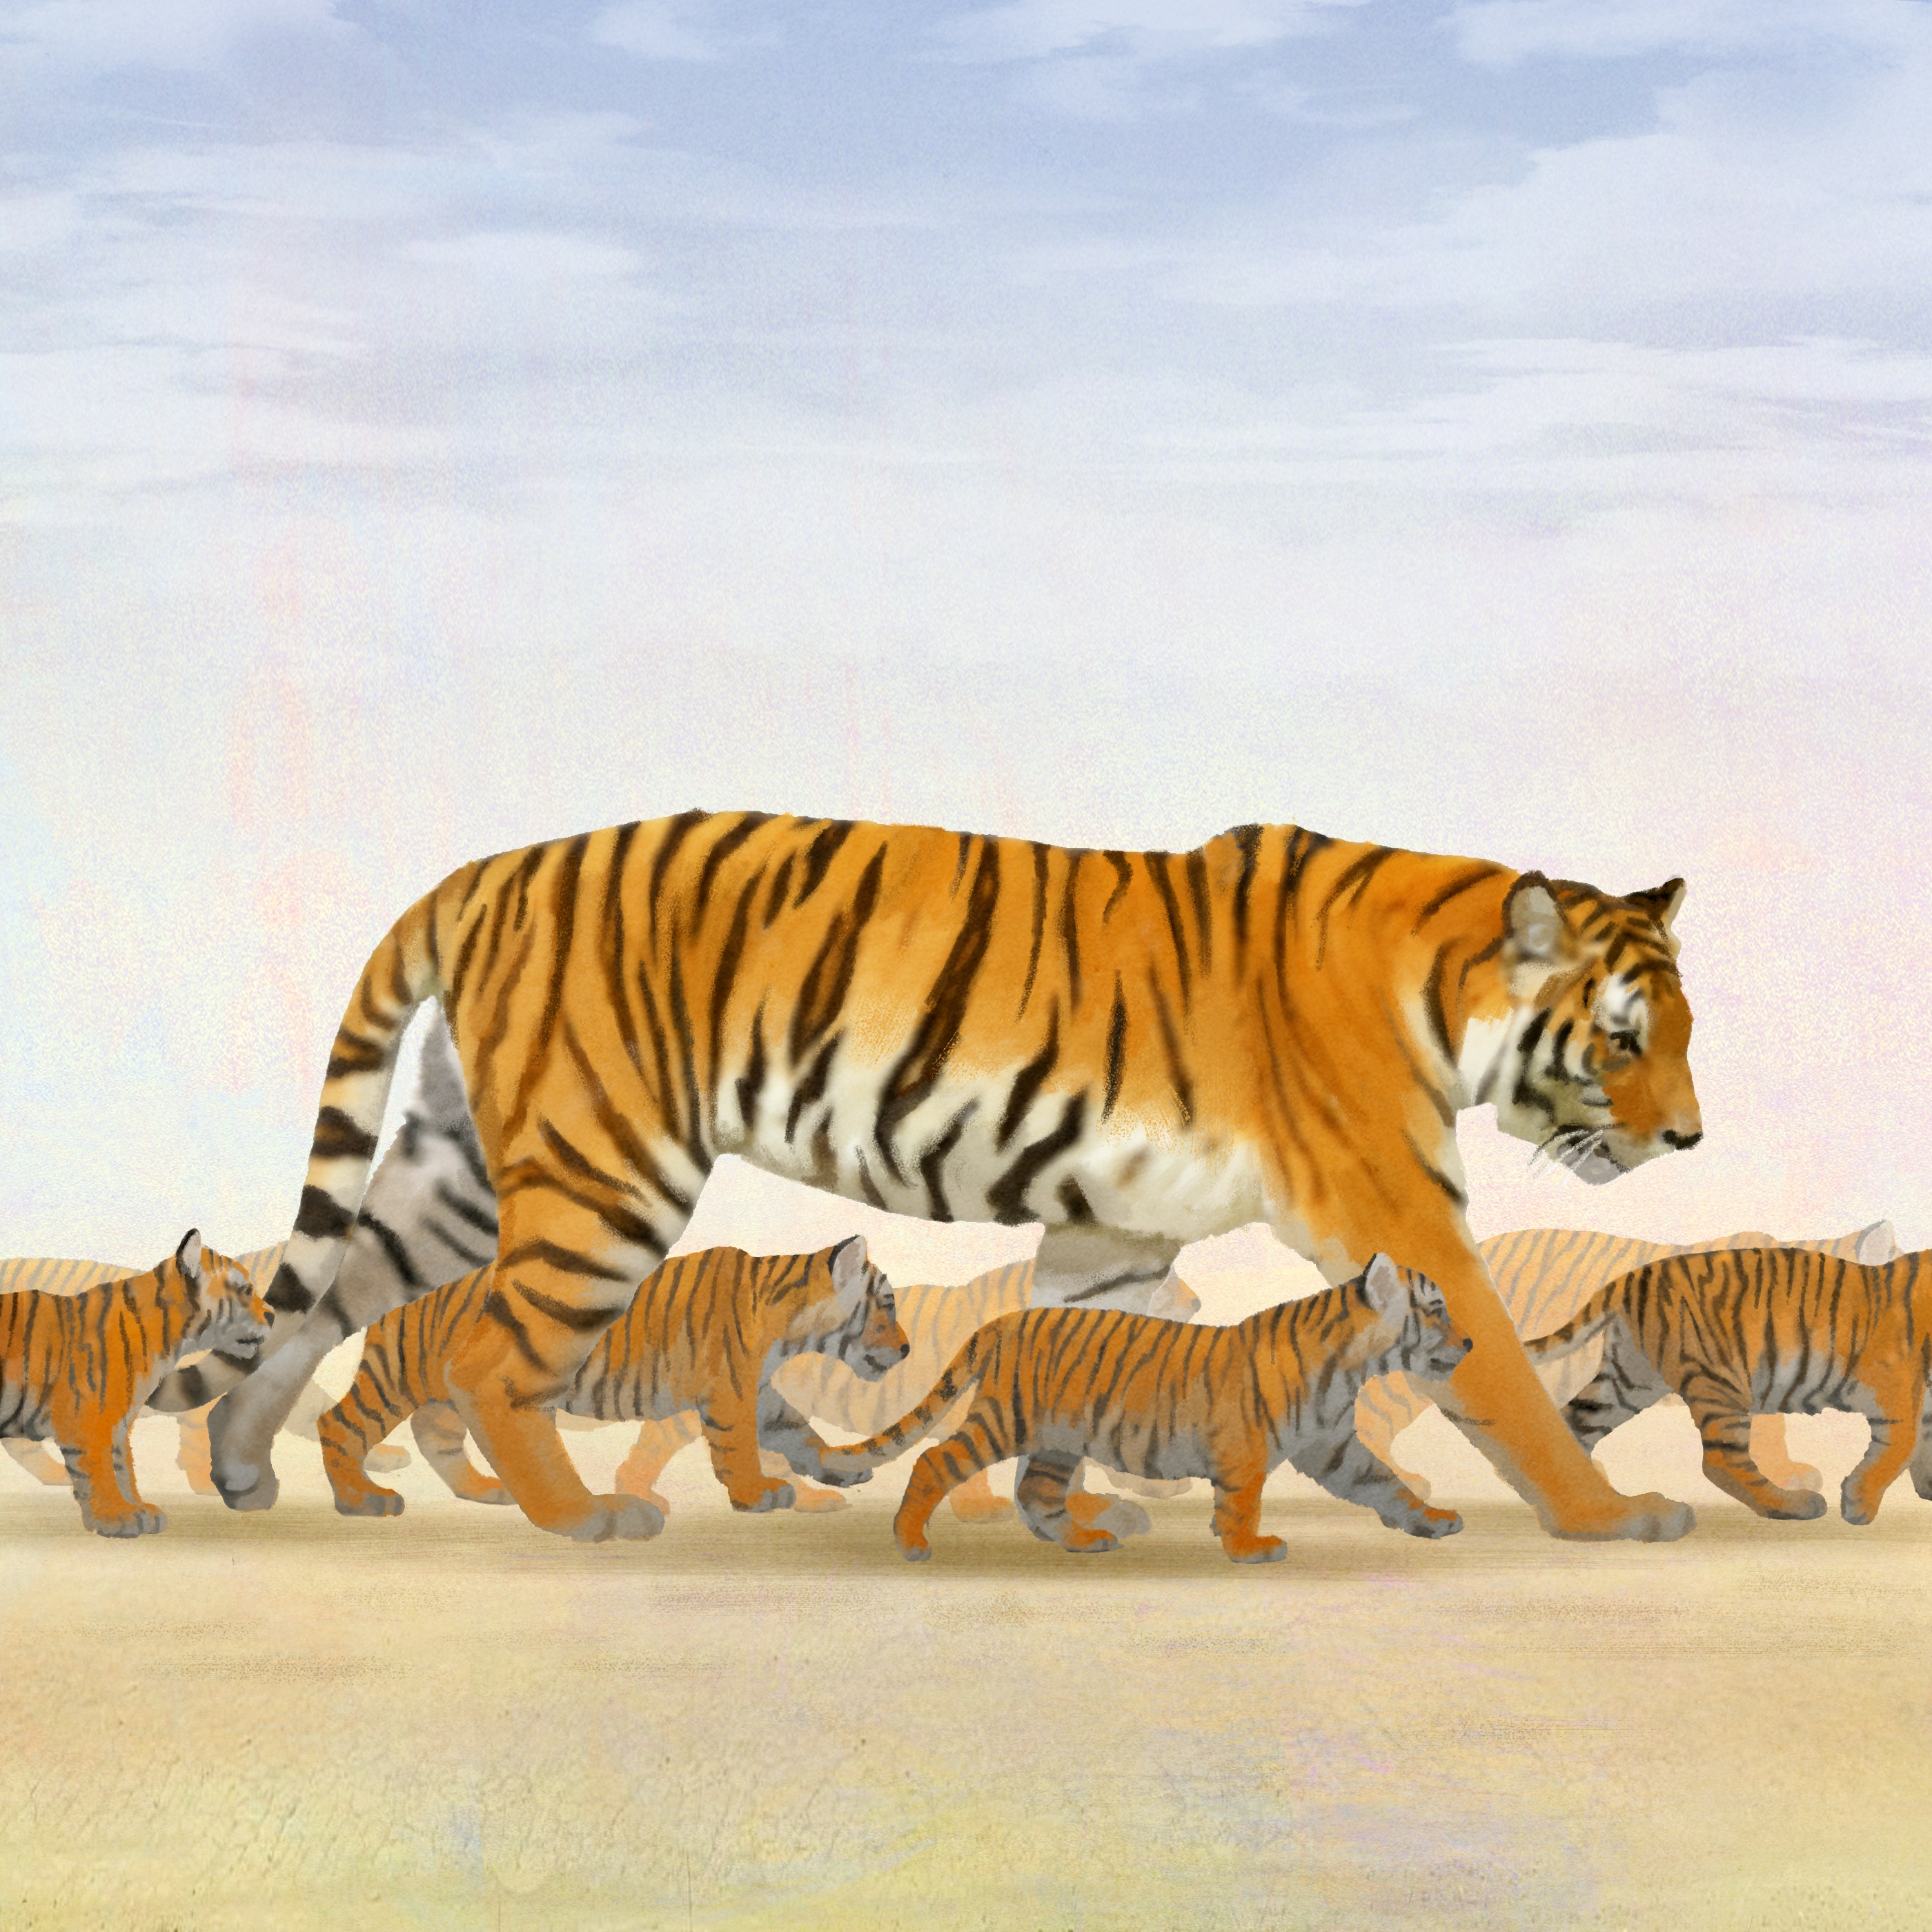 Russian Women With Tiger Illustration Wallpapers